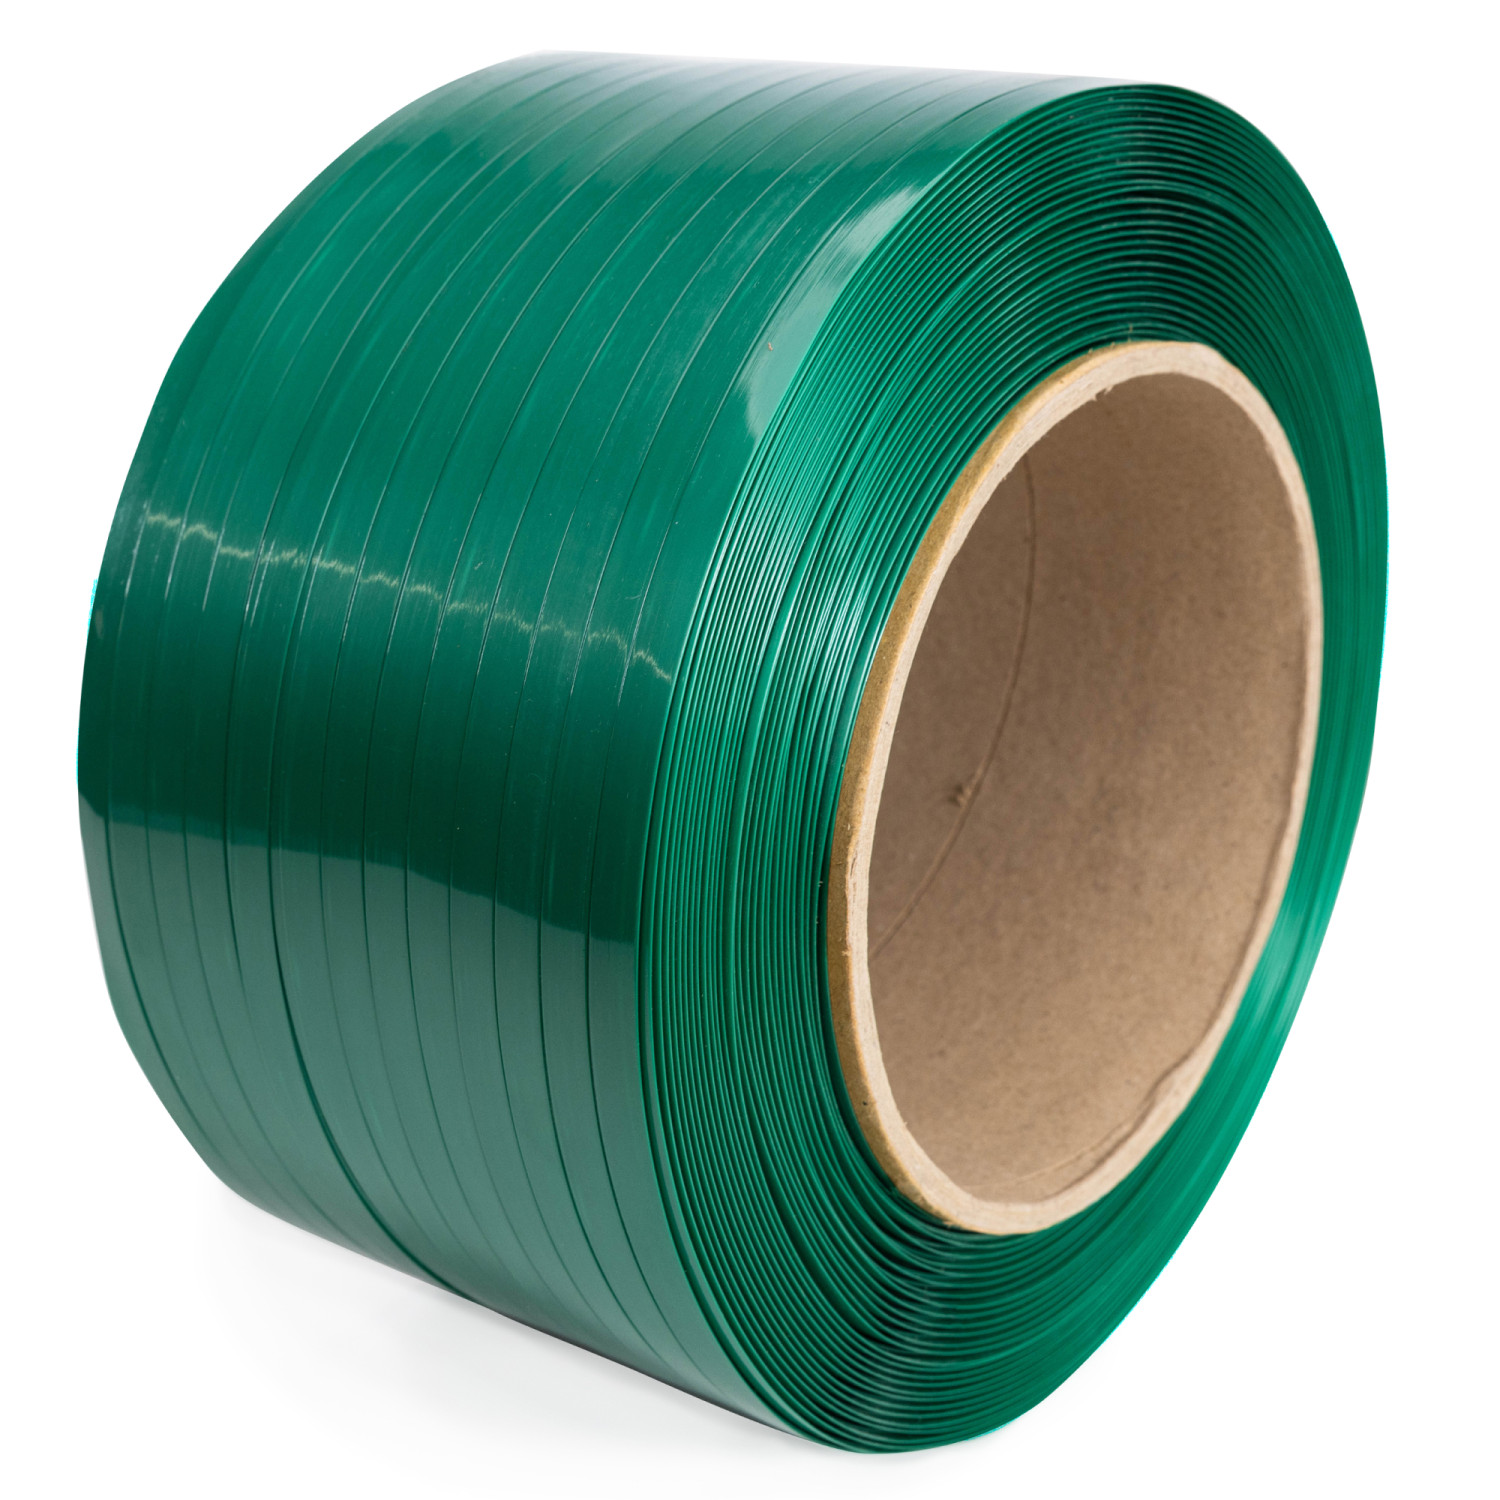 1/2 x 0.025 x 3440' Polyester (PET) Strapping Roll of 8 x 8 Core Size,  780 lbs. Break Strength, Green, Smooth buy in stock in U.S. in IDL Packaging